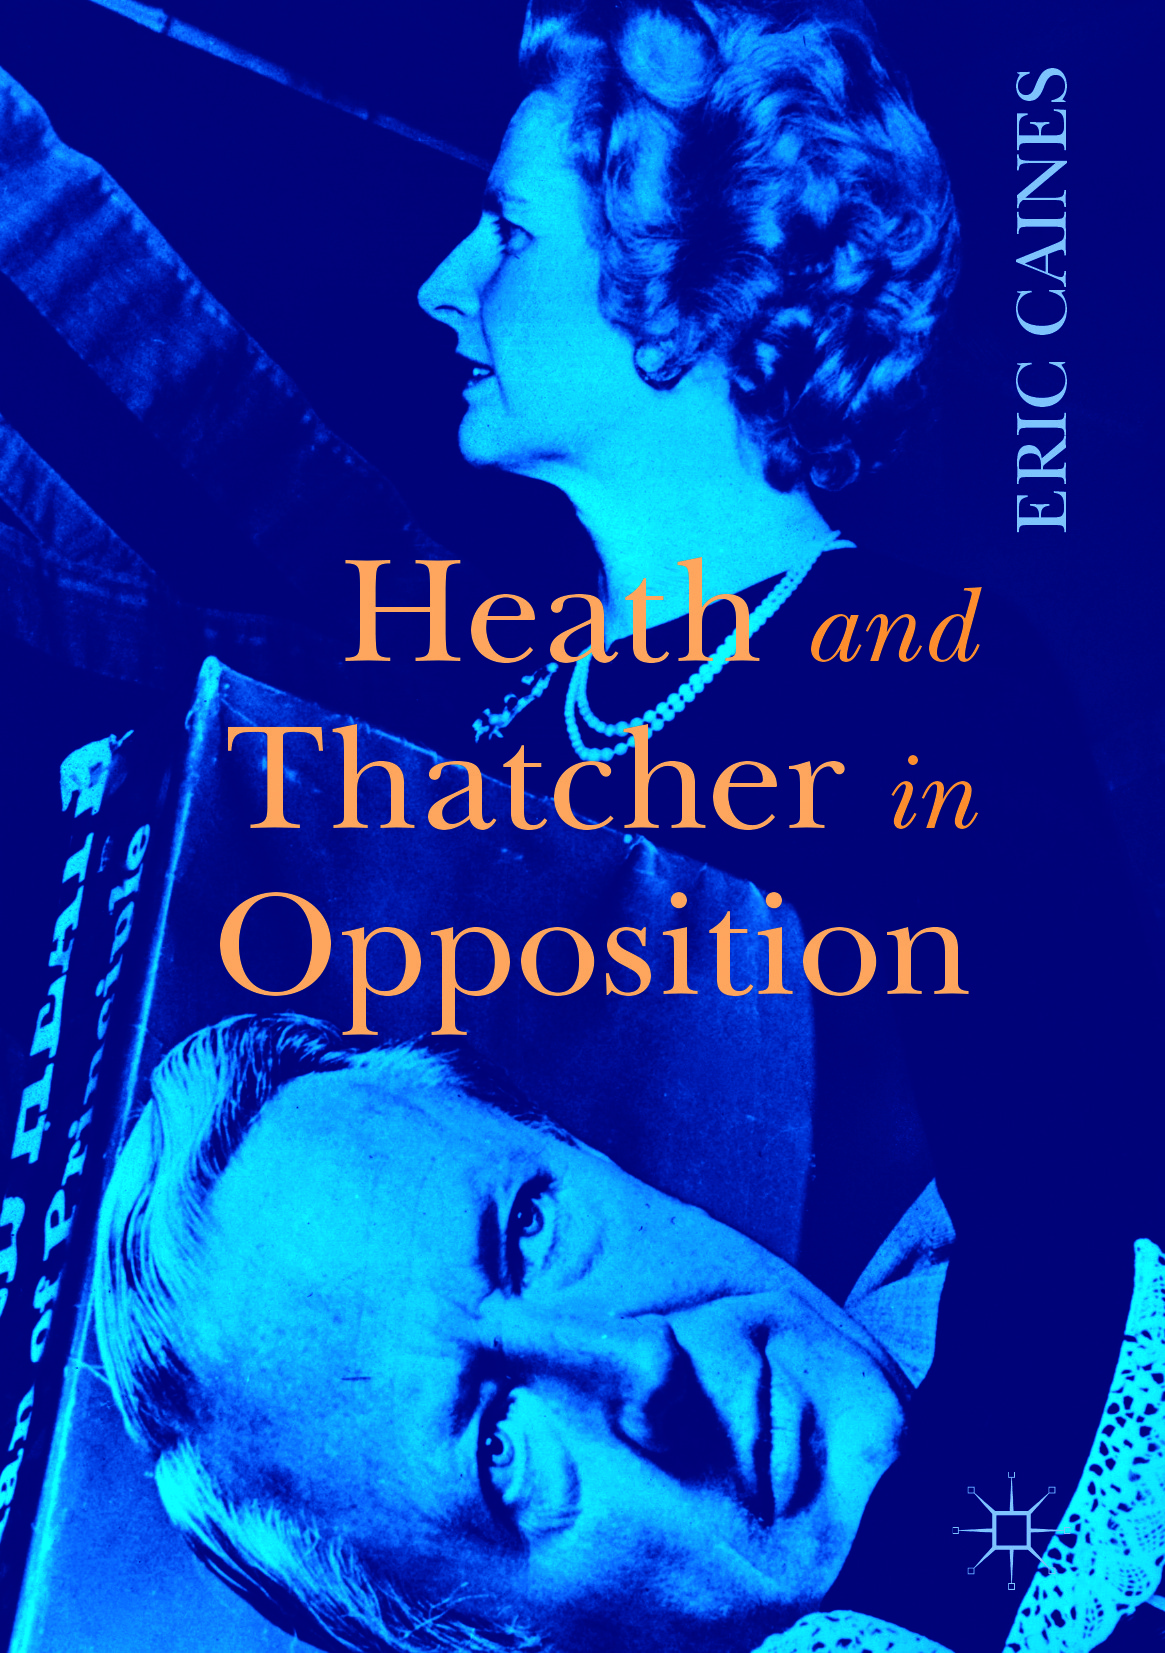 Caines, Eric - Heath and Thatcher in Opposition, ebook